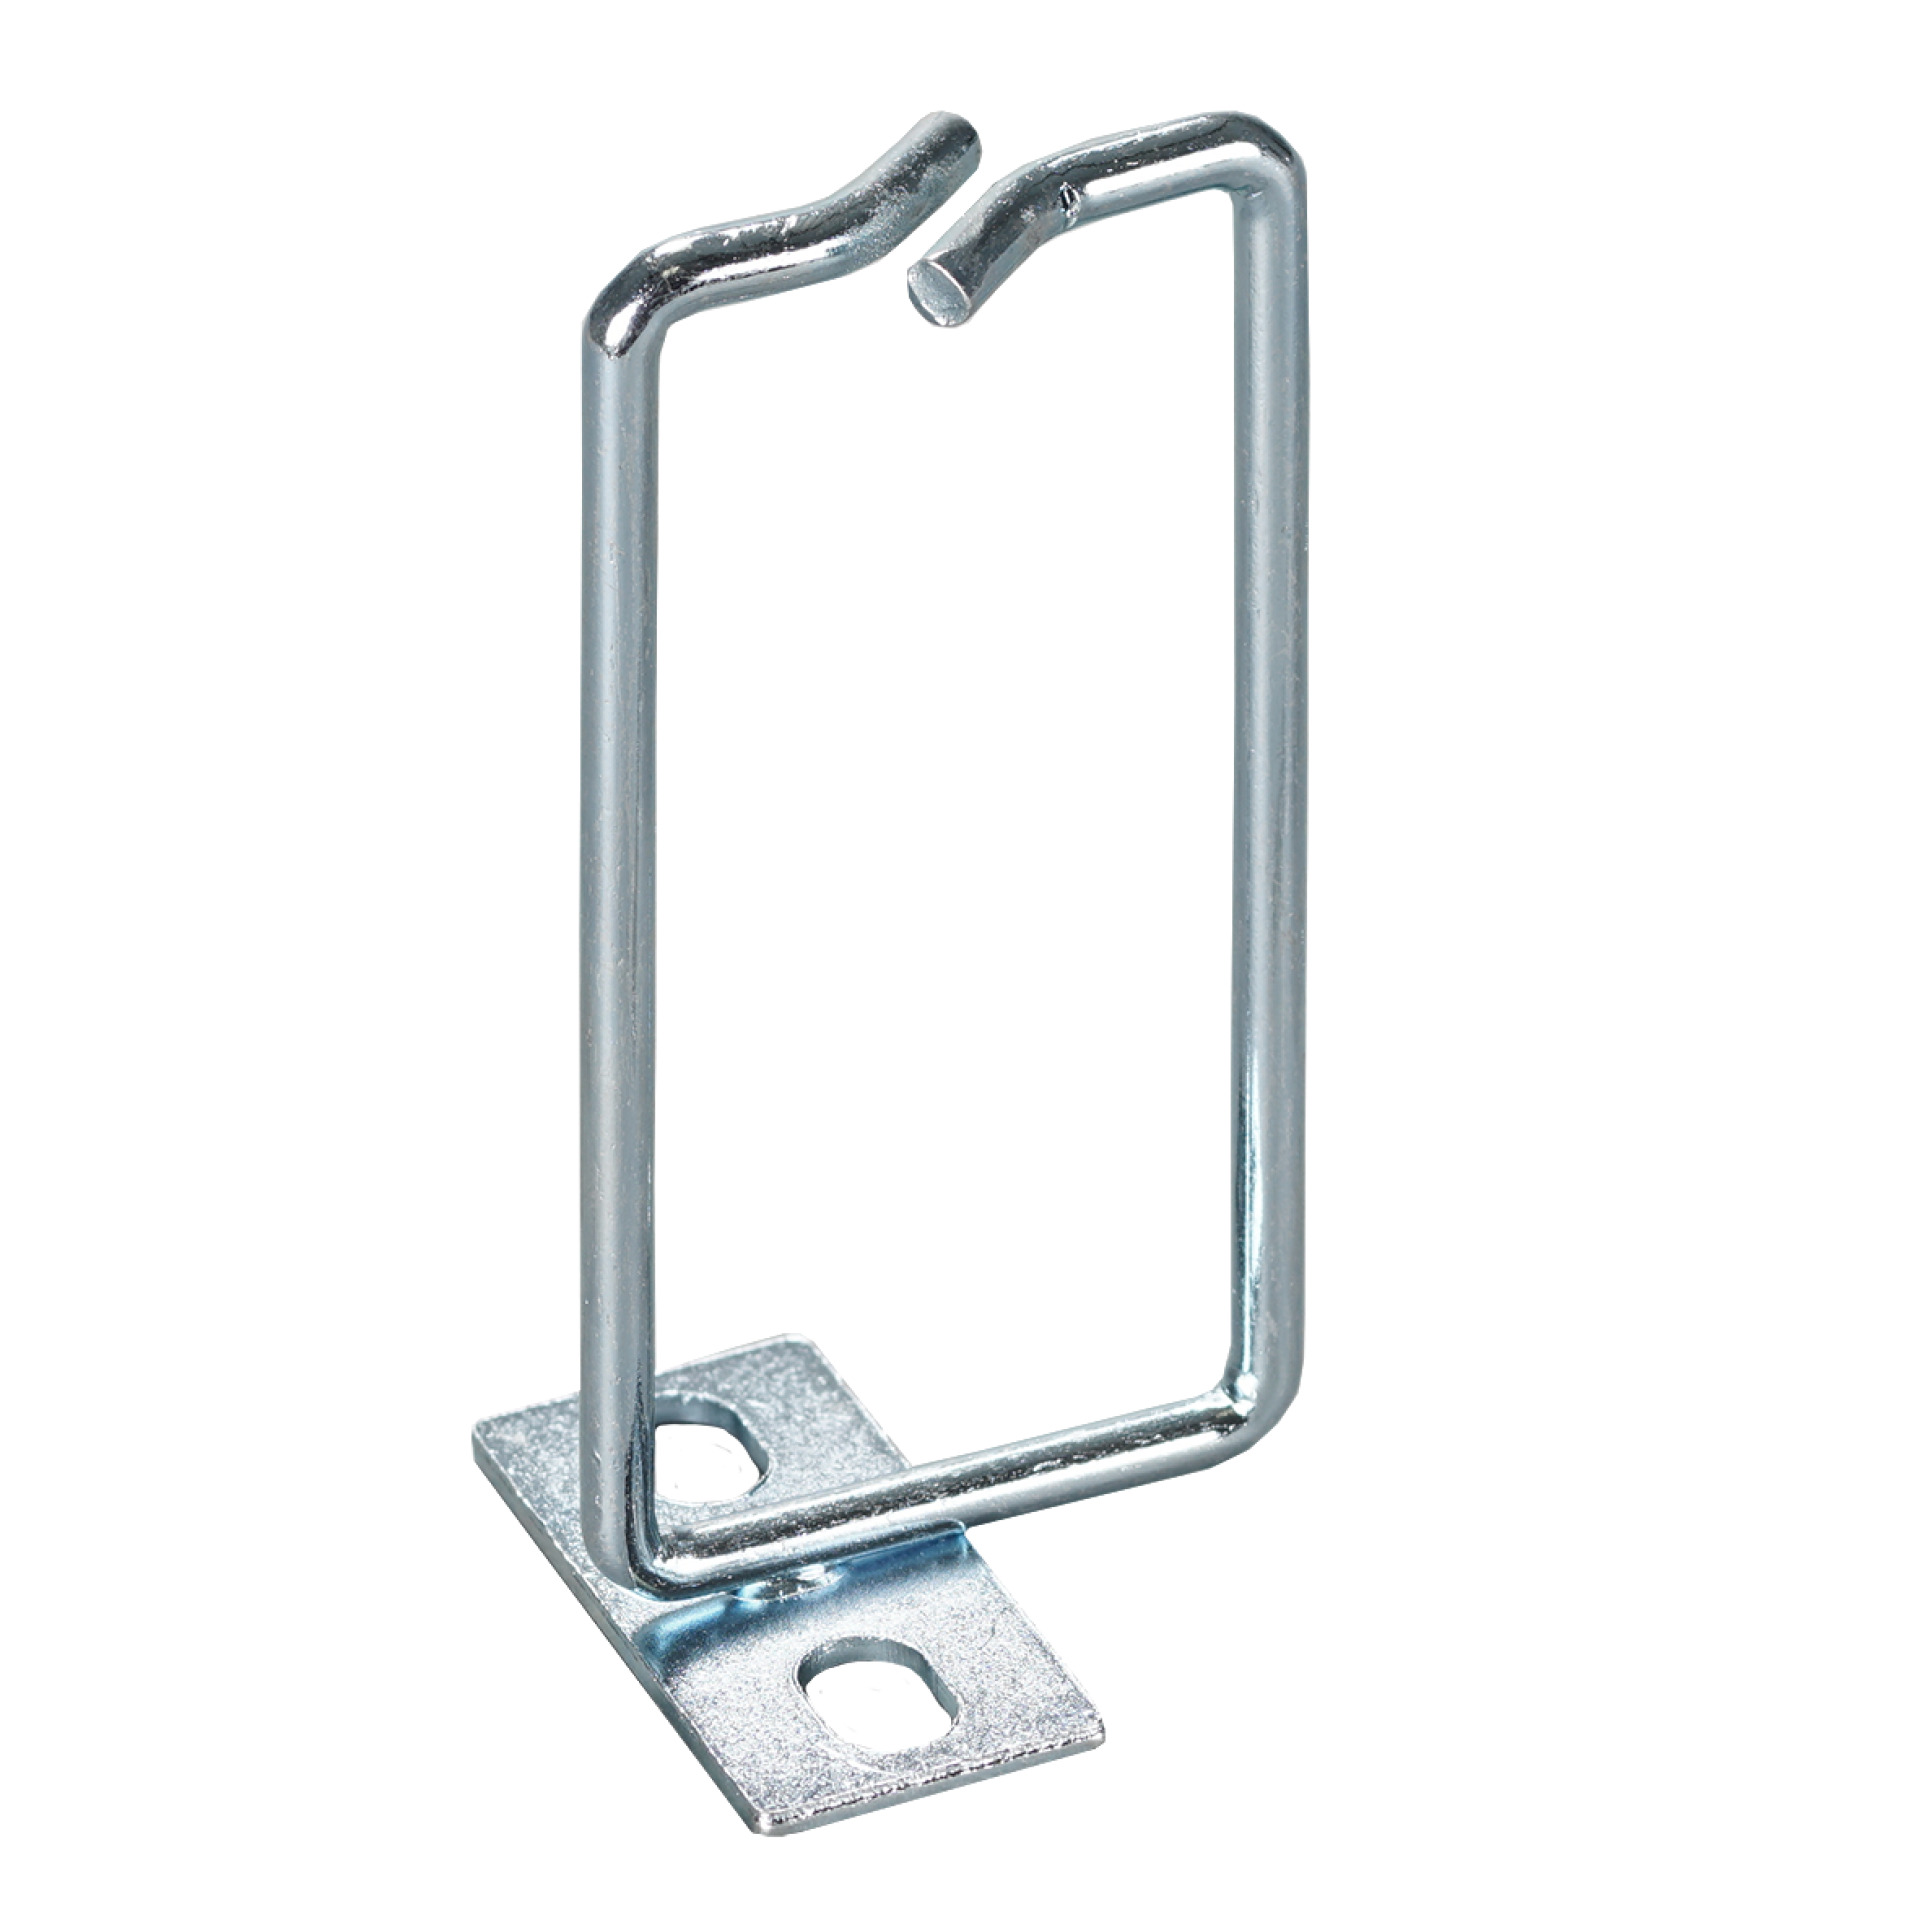 Cable Routing Bracket 40 x 40 mm with Lateral Offset Mounting Plate